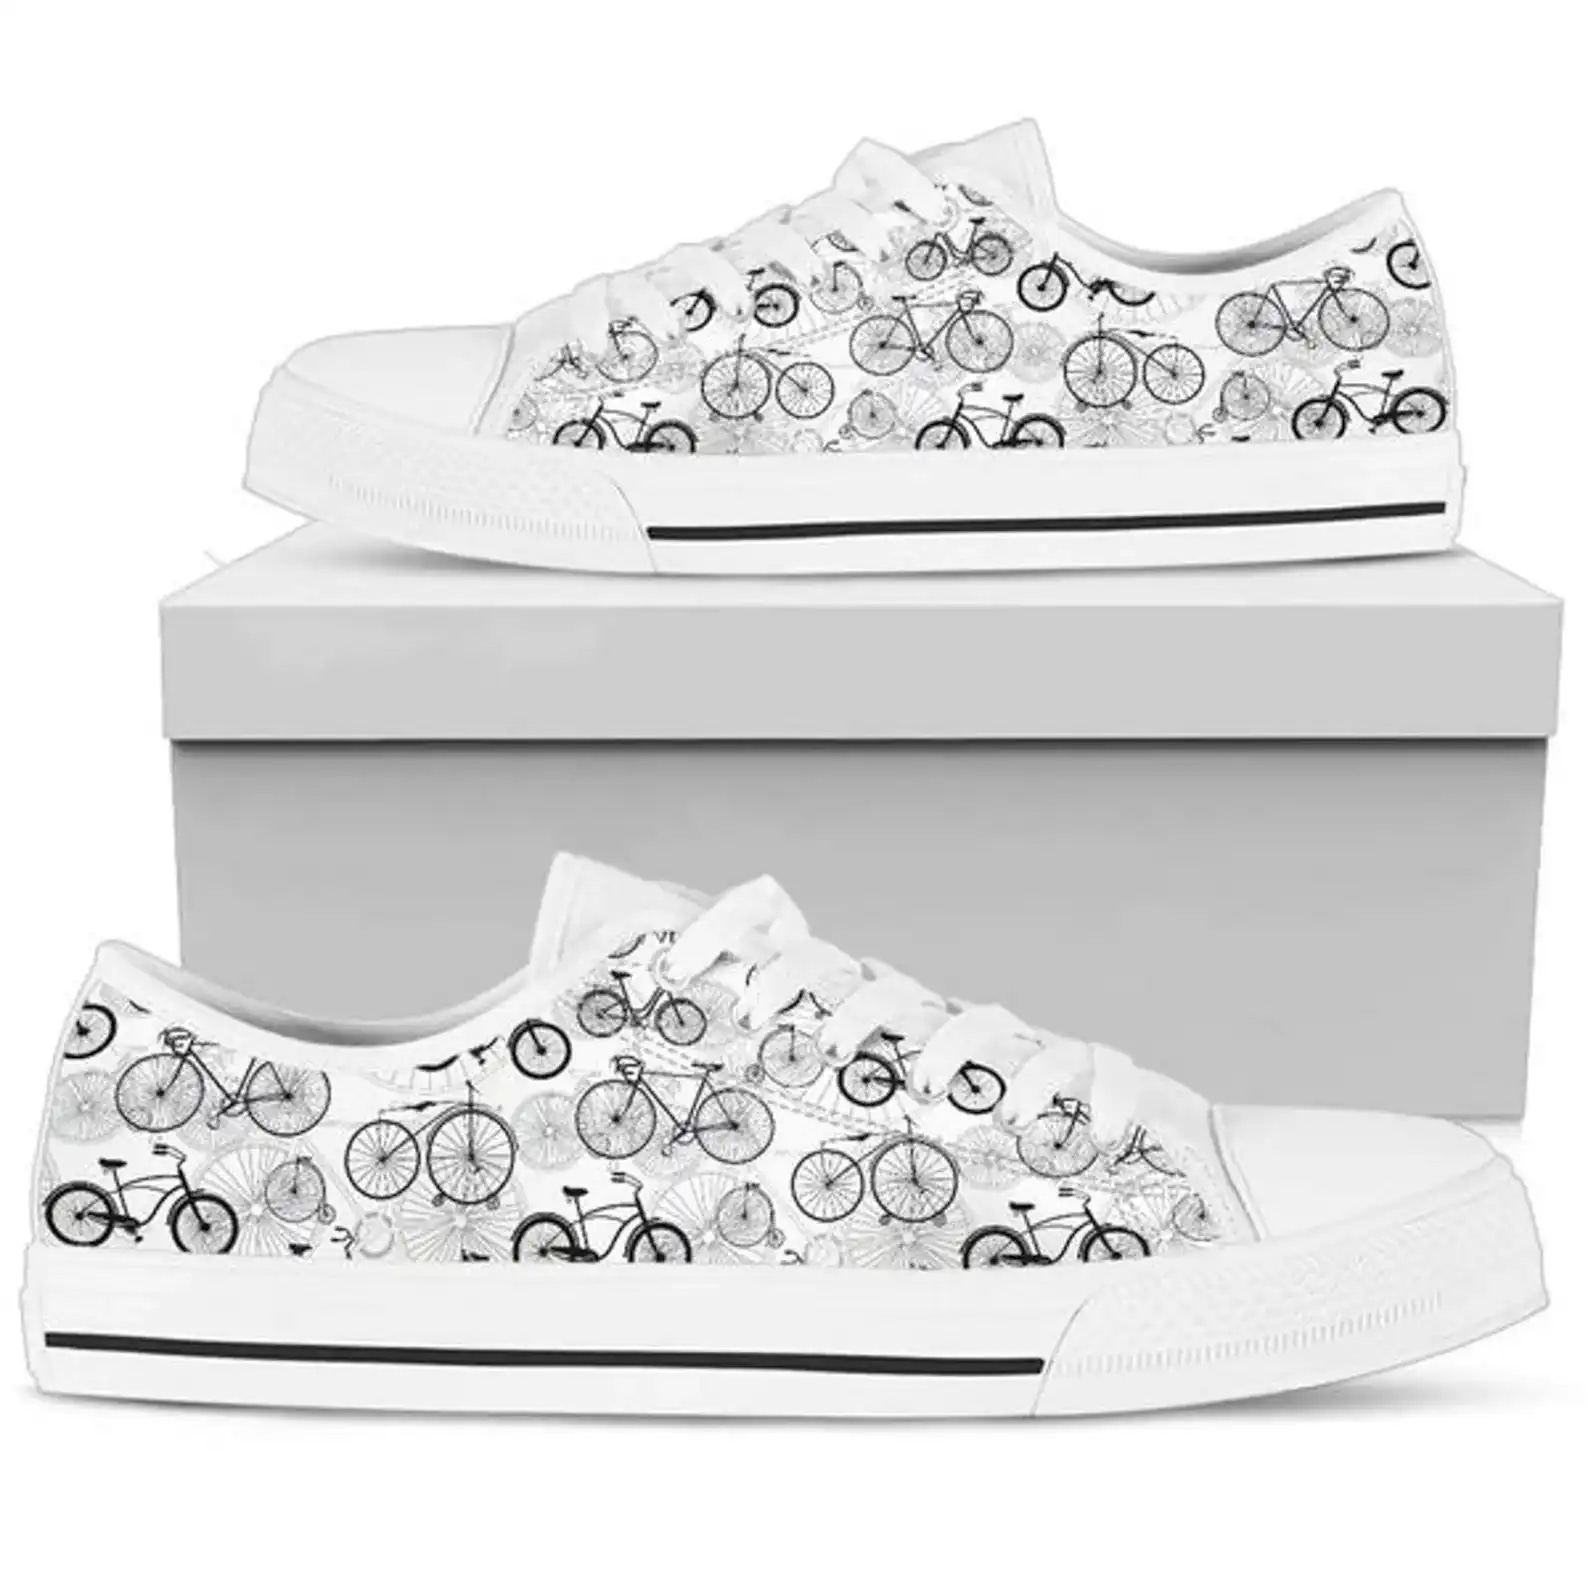 Bicyce Custom Shoes Cycling Is Good For Health Low Top Sneakers